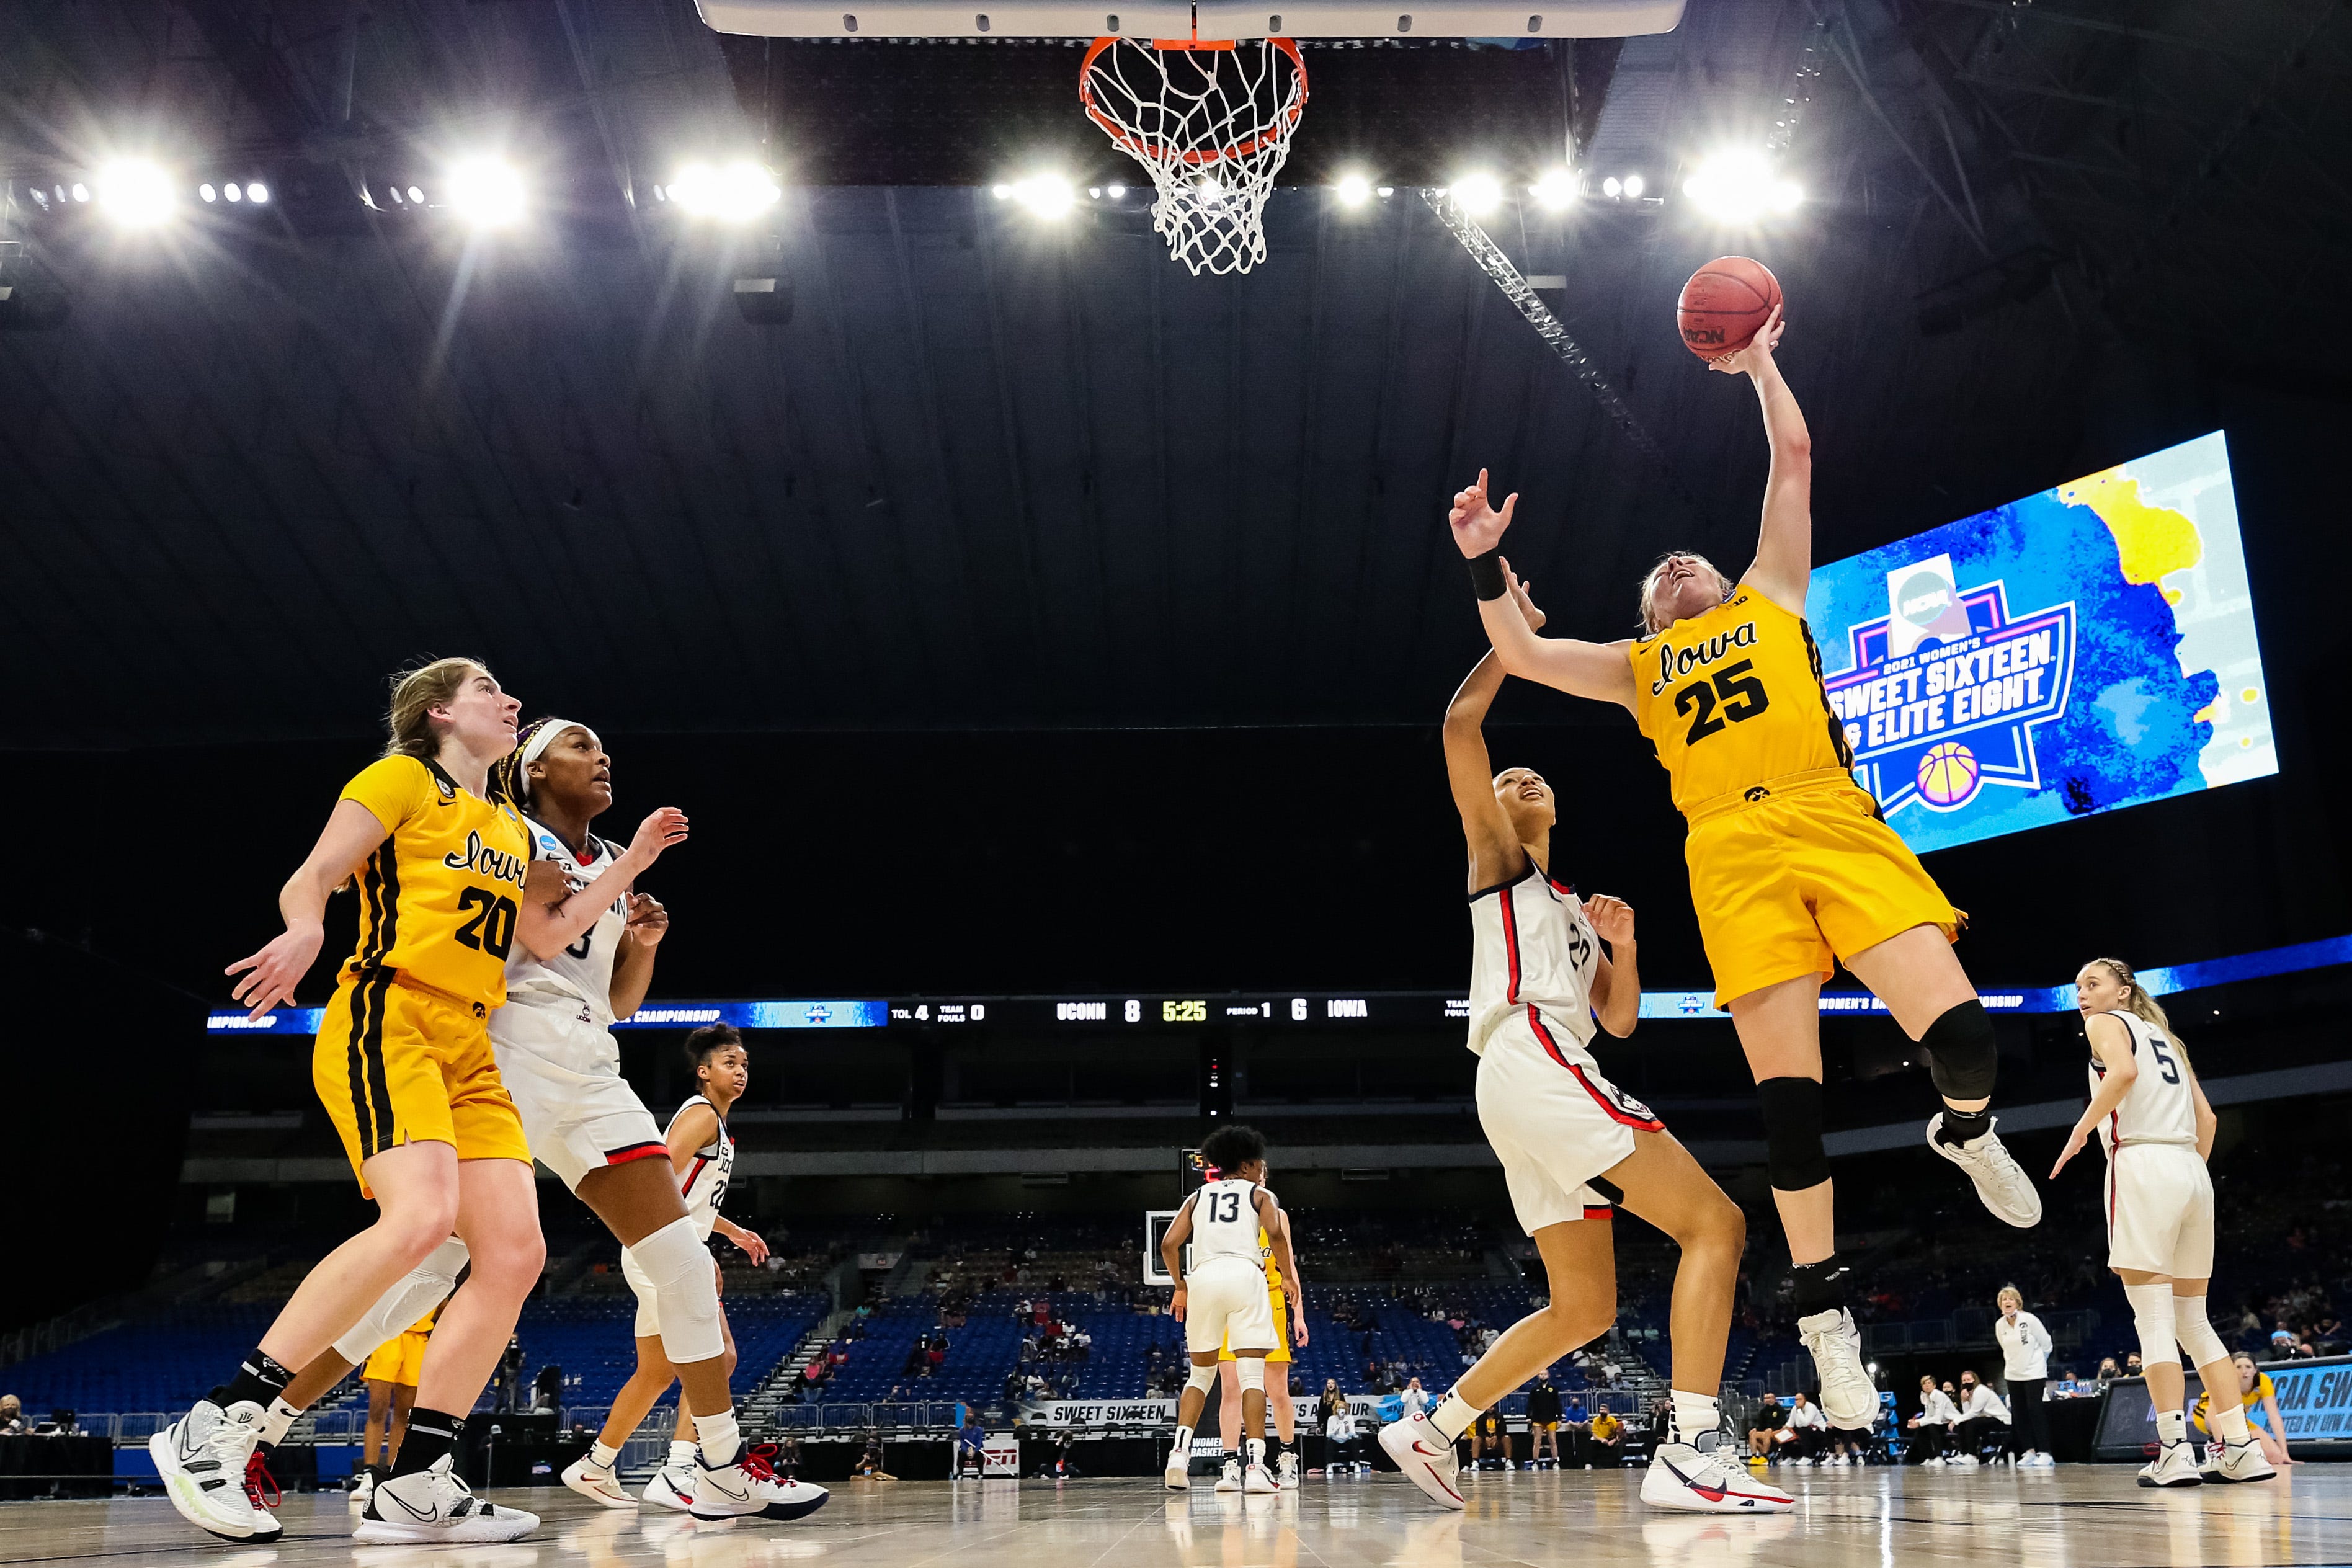 Iowa center Monika Czinano (25) drives to the basket against UConn's Olivia Nelson-Ododa (20) during the first half in the Sweet 16 round of the NCAA Women's Basketball Tournament at the Alamodome on March 27, 2021 in San Antonio, Texas.